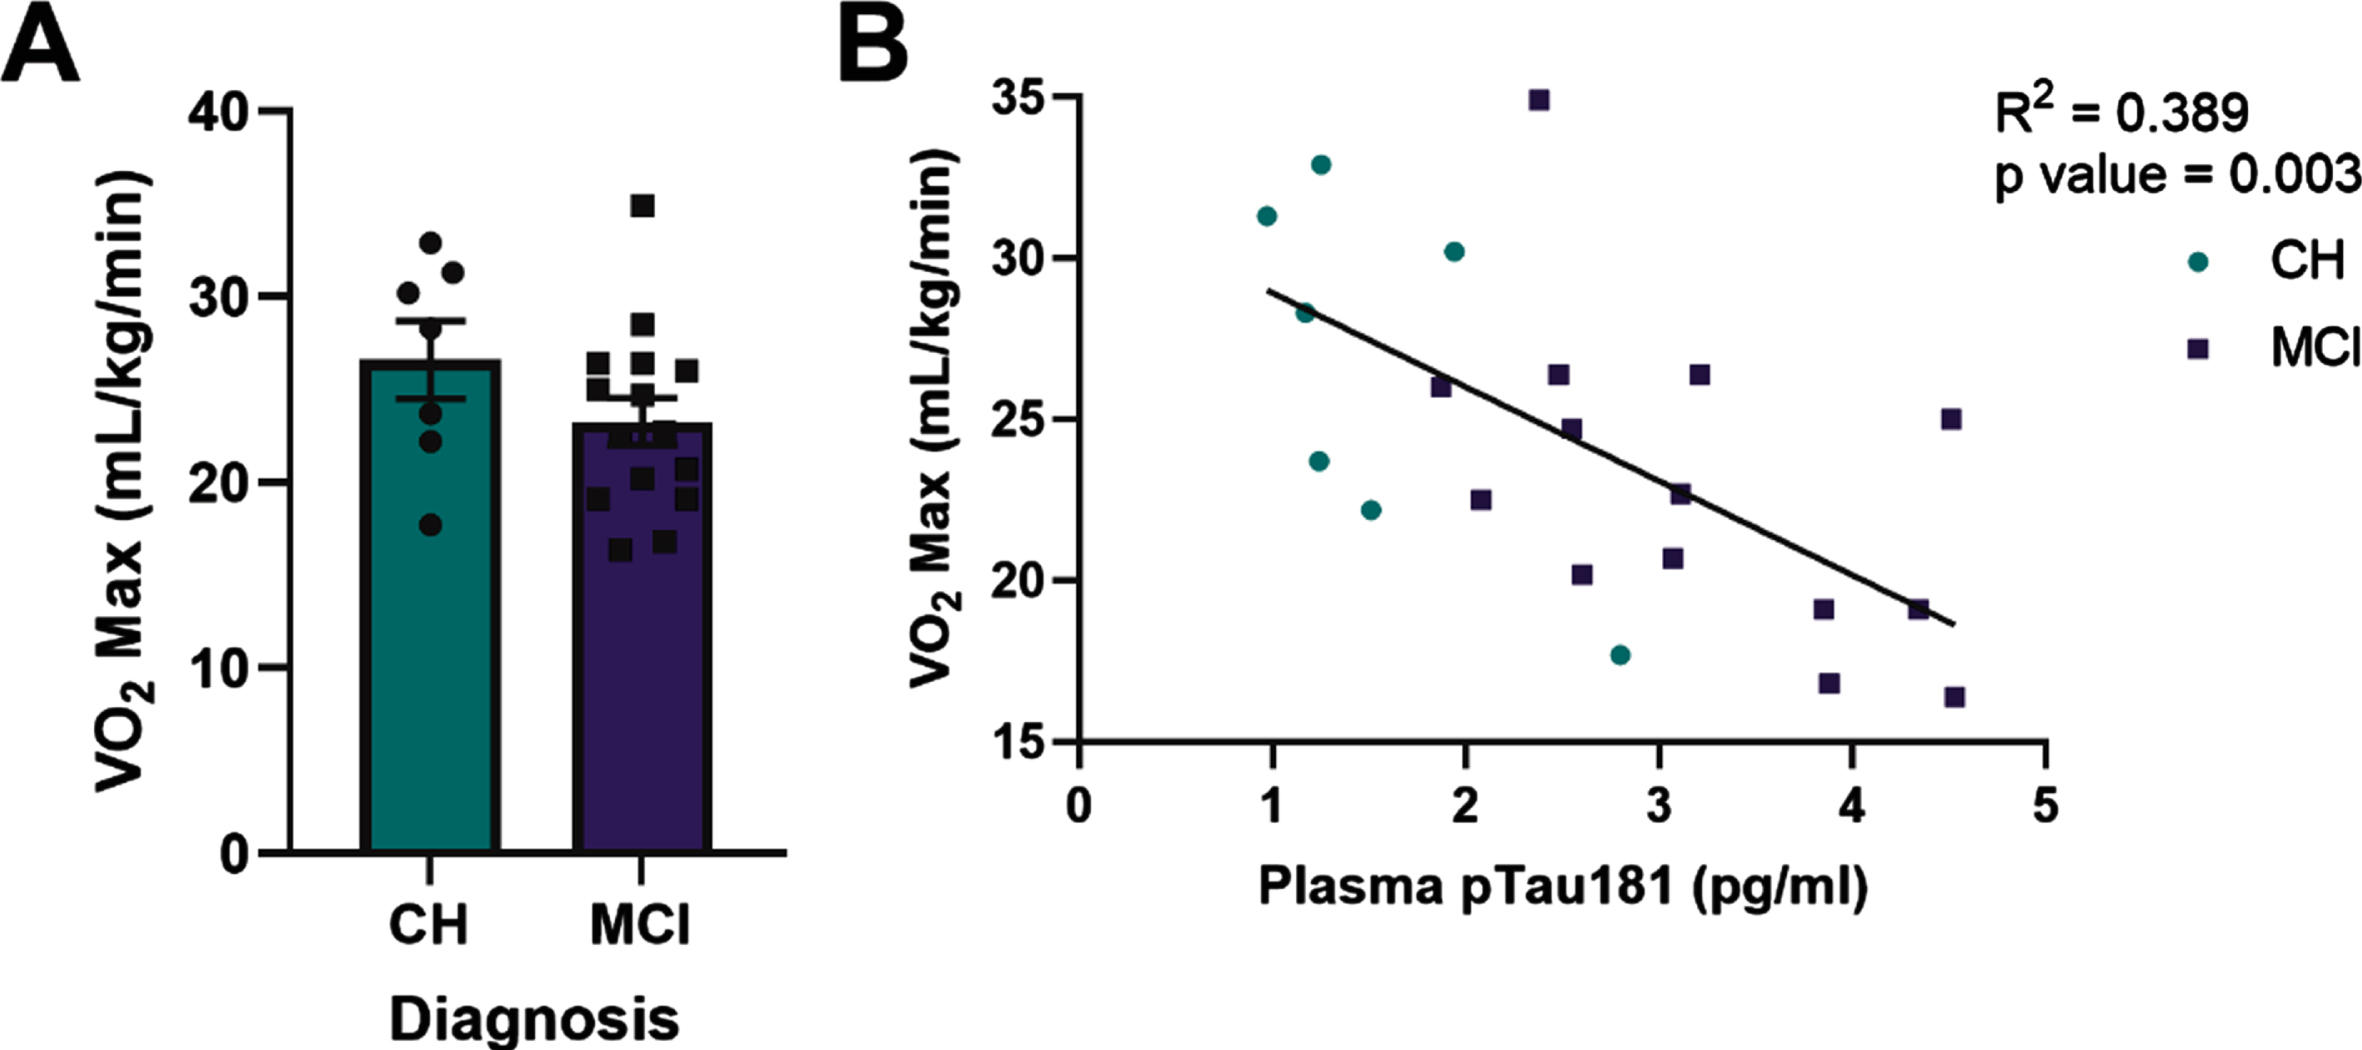 Plasma phosphorylated tau181 (pTau181) negatively correlates with VO2 max in all apolipoprotein ɛ4 (APOE4) carriers. VO2 max in relationship to diagnostic status (A). Plasma pTau181 measured by Simoa-HDX immunoassay in relationship to VO2 max in all APOE4 carriers (B). CH, cognitively healthy older adults; MCI, mild cognitive impairment. CH APOE4 carriers (n = 7), MCI APOE4 carriers (n = 14-15).